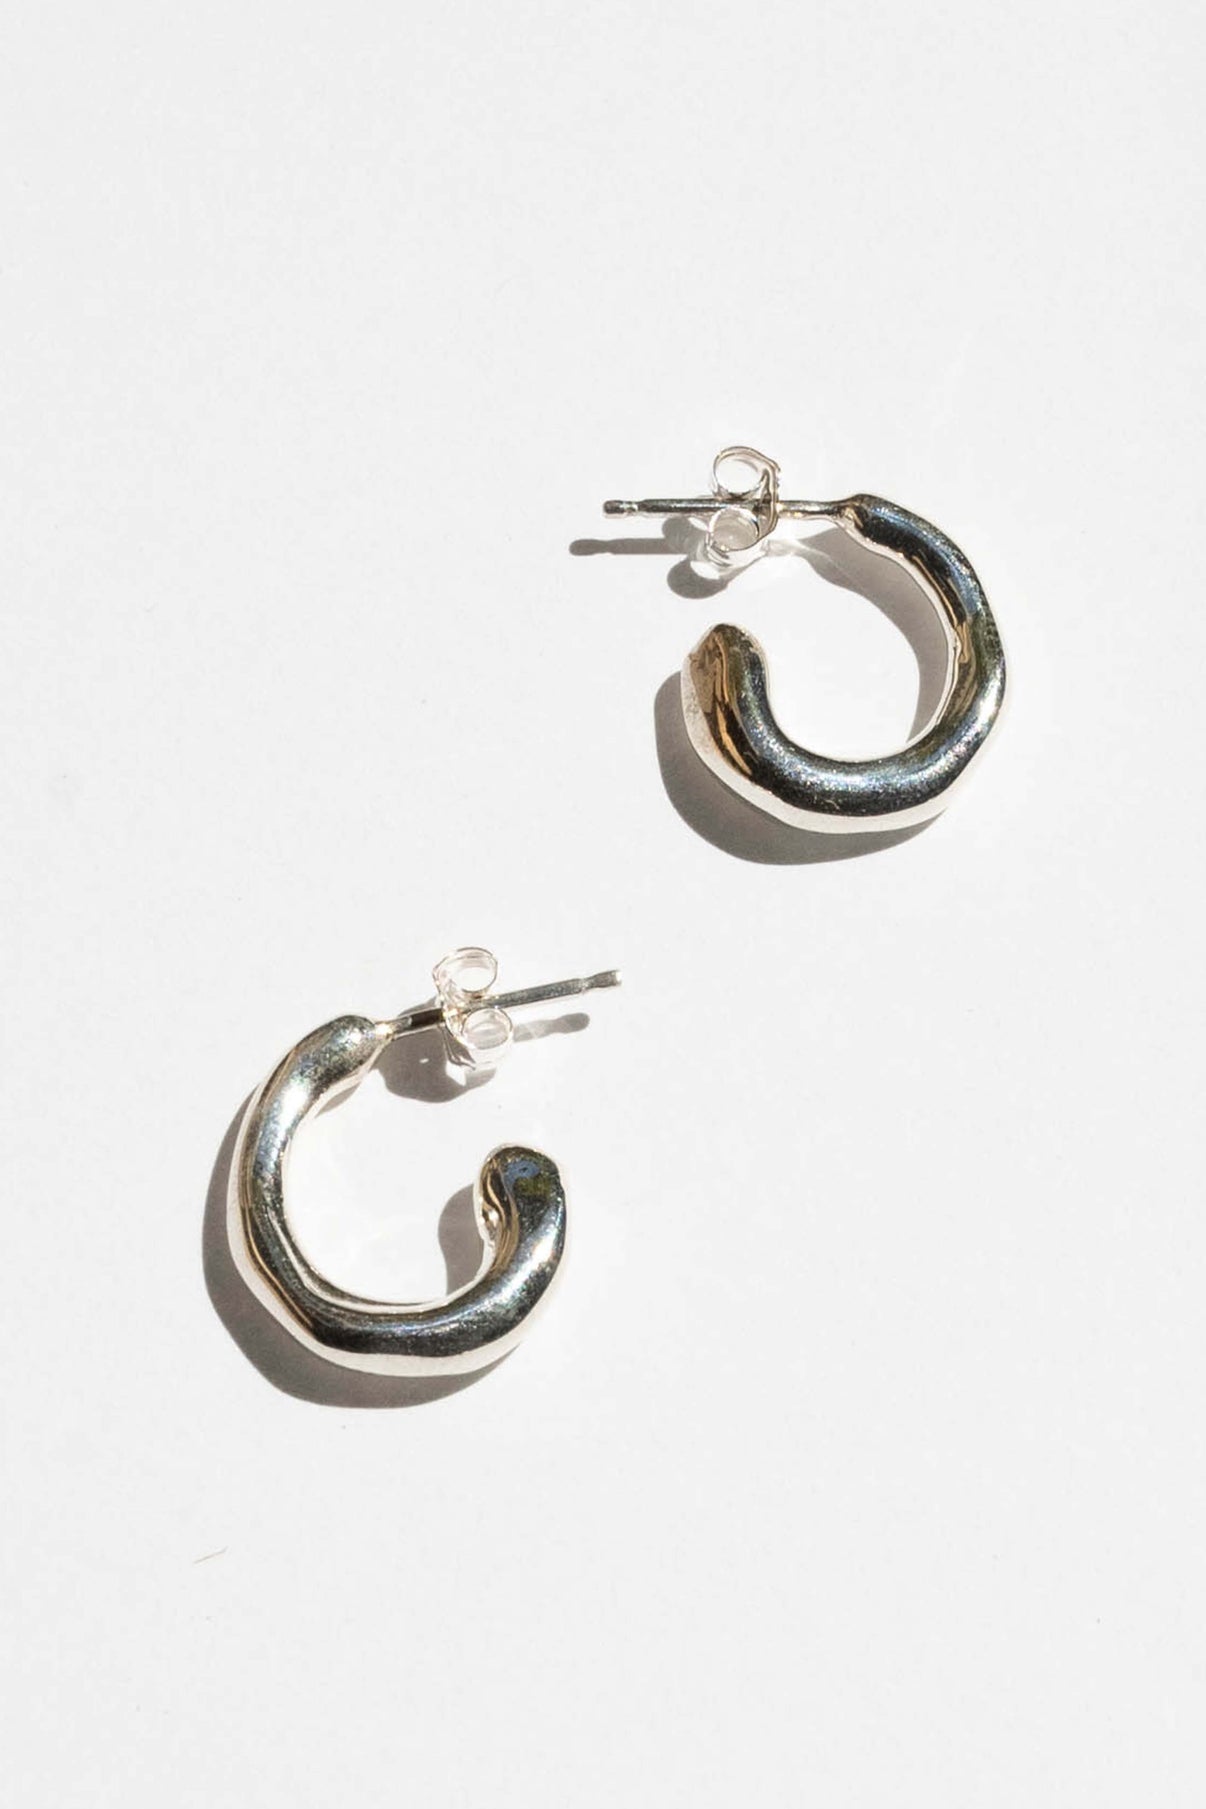 moneh brisel jewelry / The Fluid hoops embody the abstract and playful shape of water. The soft round edges and organic details serve as a reminder to flow with the day ahead of you. Perfect mini everyday hoops.\